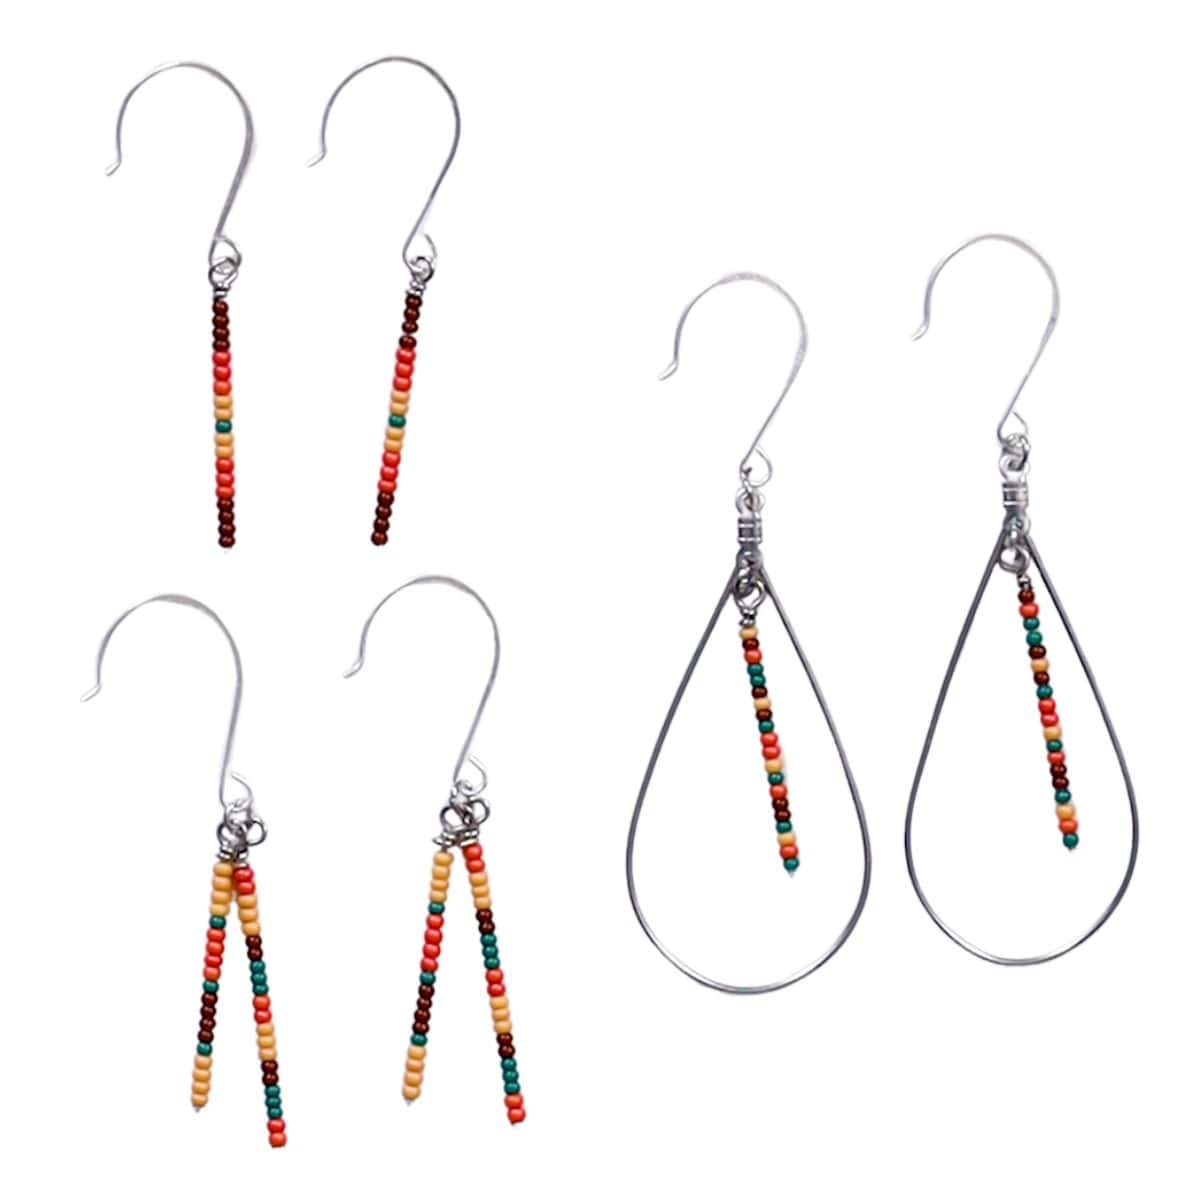 3 Seed Bead Earring Tutorials for Beginners - The Crafty Blog Stalker